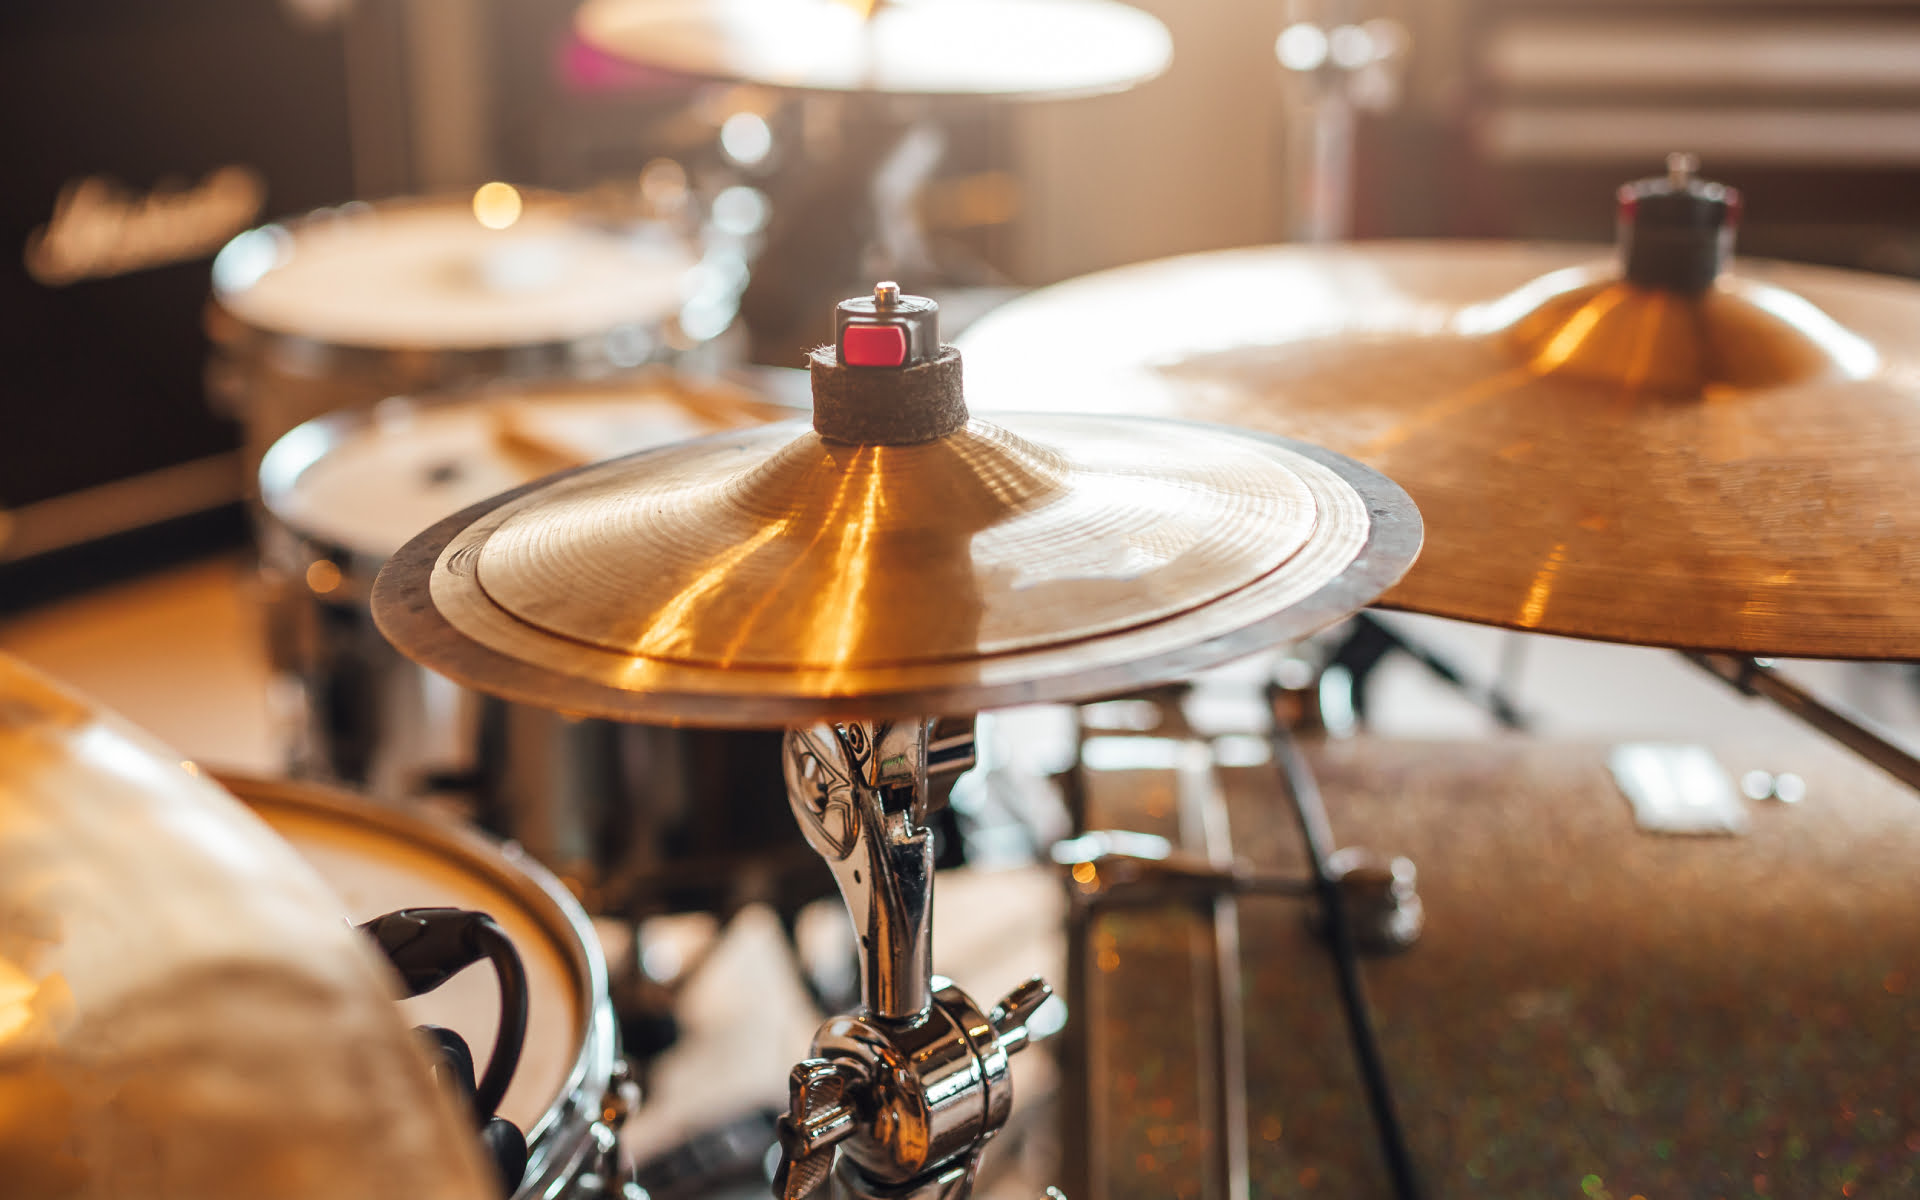 6 Best Cymbal Stacks for FX and Accents (Feb 2021)